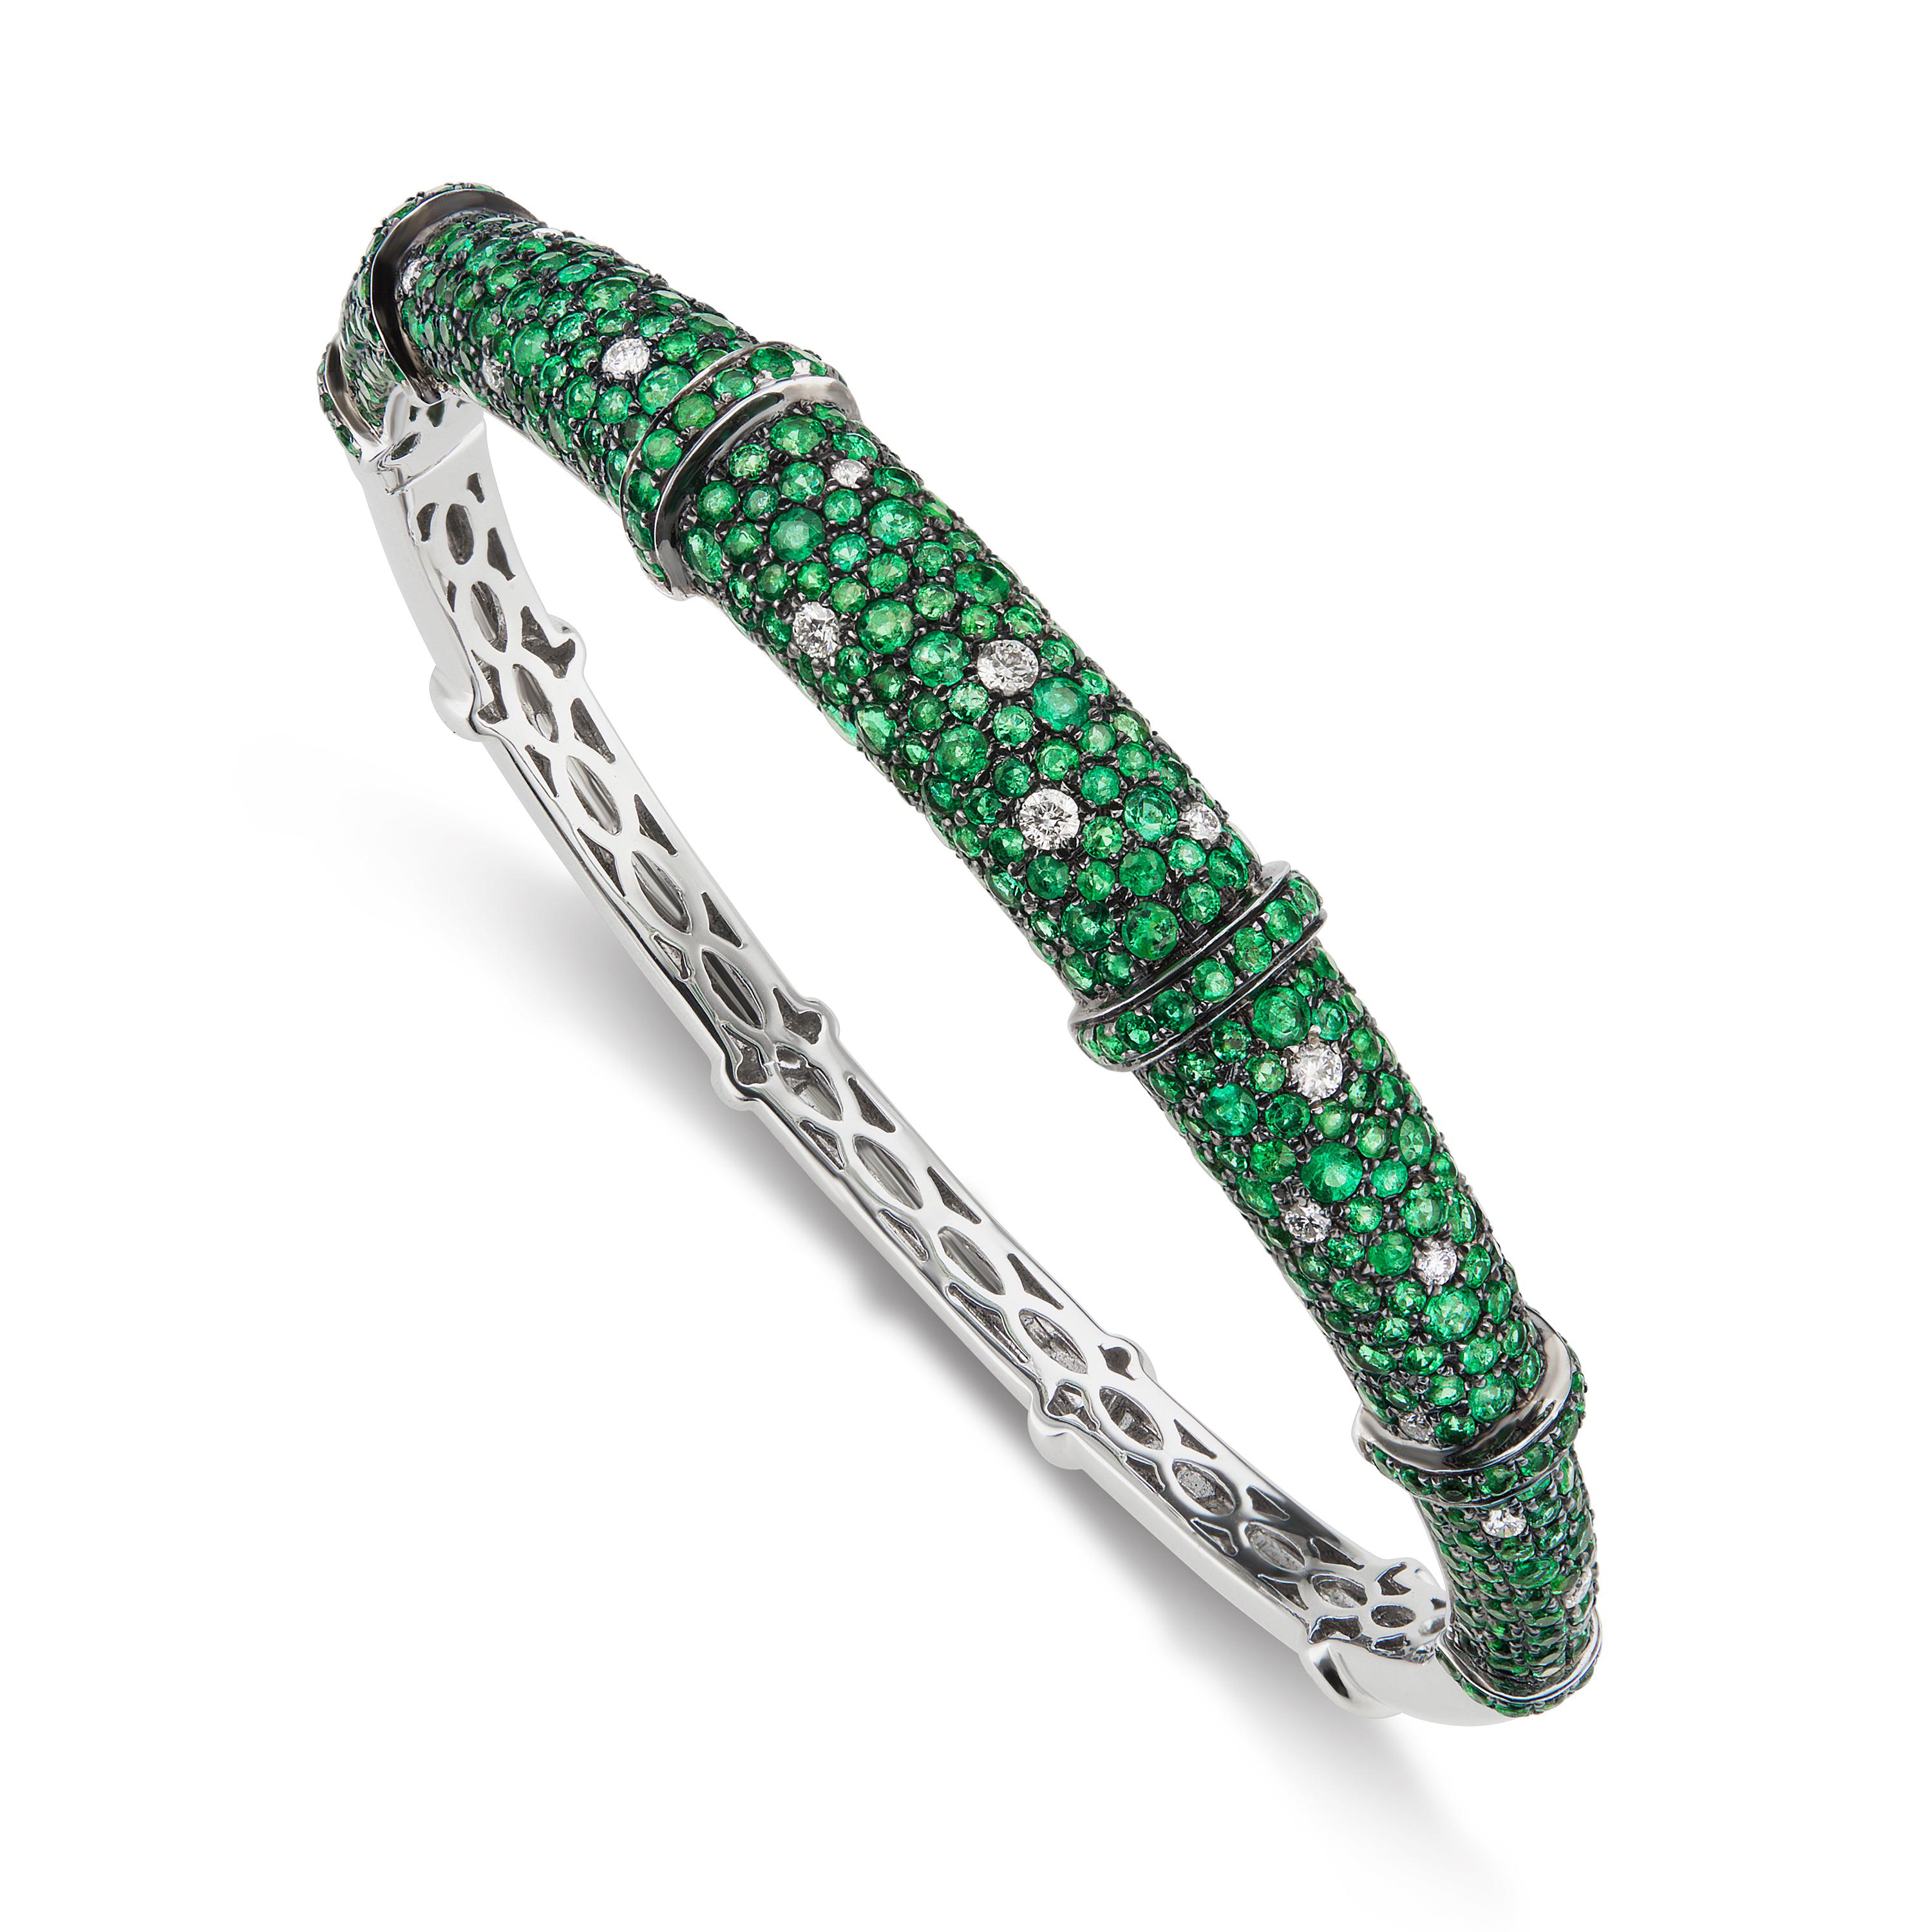 This 18K White Gold Nigaam gemstone-encrusted bangle has a traditional style. The 0.24 Ct. round full-cut white diamonds that are set in micro pave give the white gold body a hint of sobriety. The diamonds are G in color and have a VVS2 clarity.